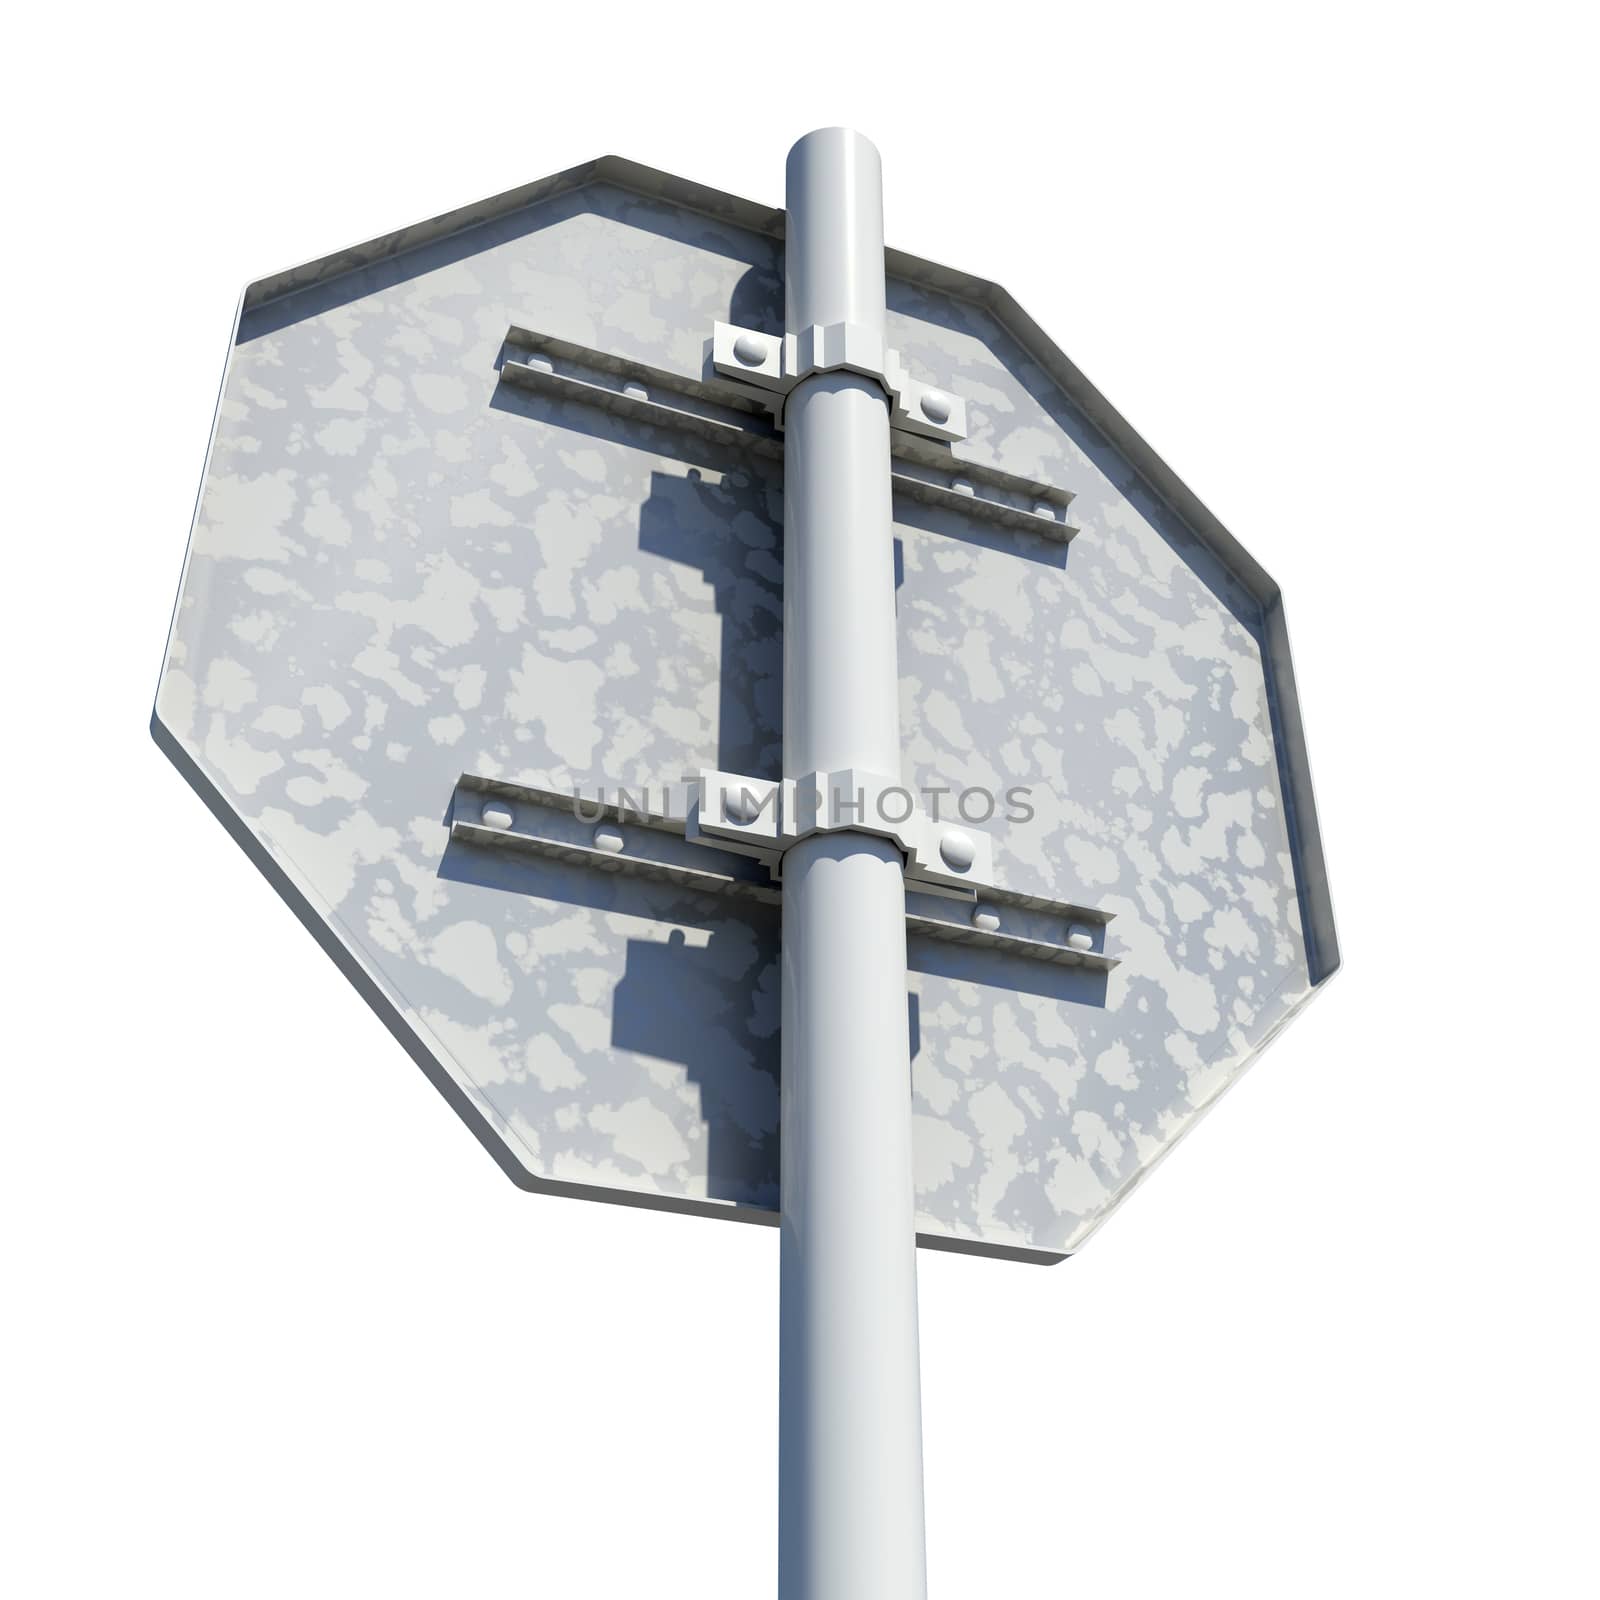 Octagonal road sign. Rear view. Isolated on white background